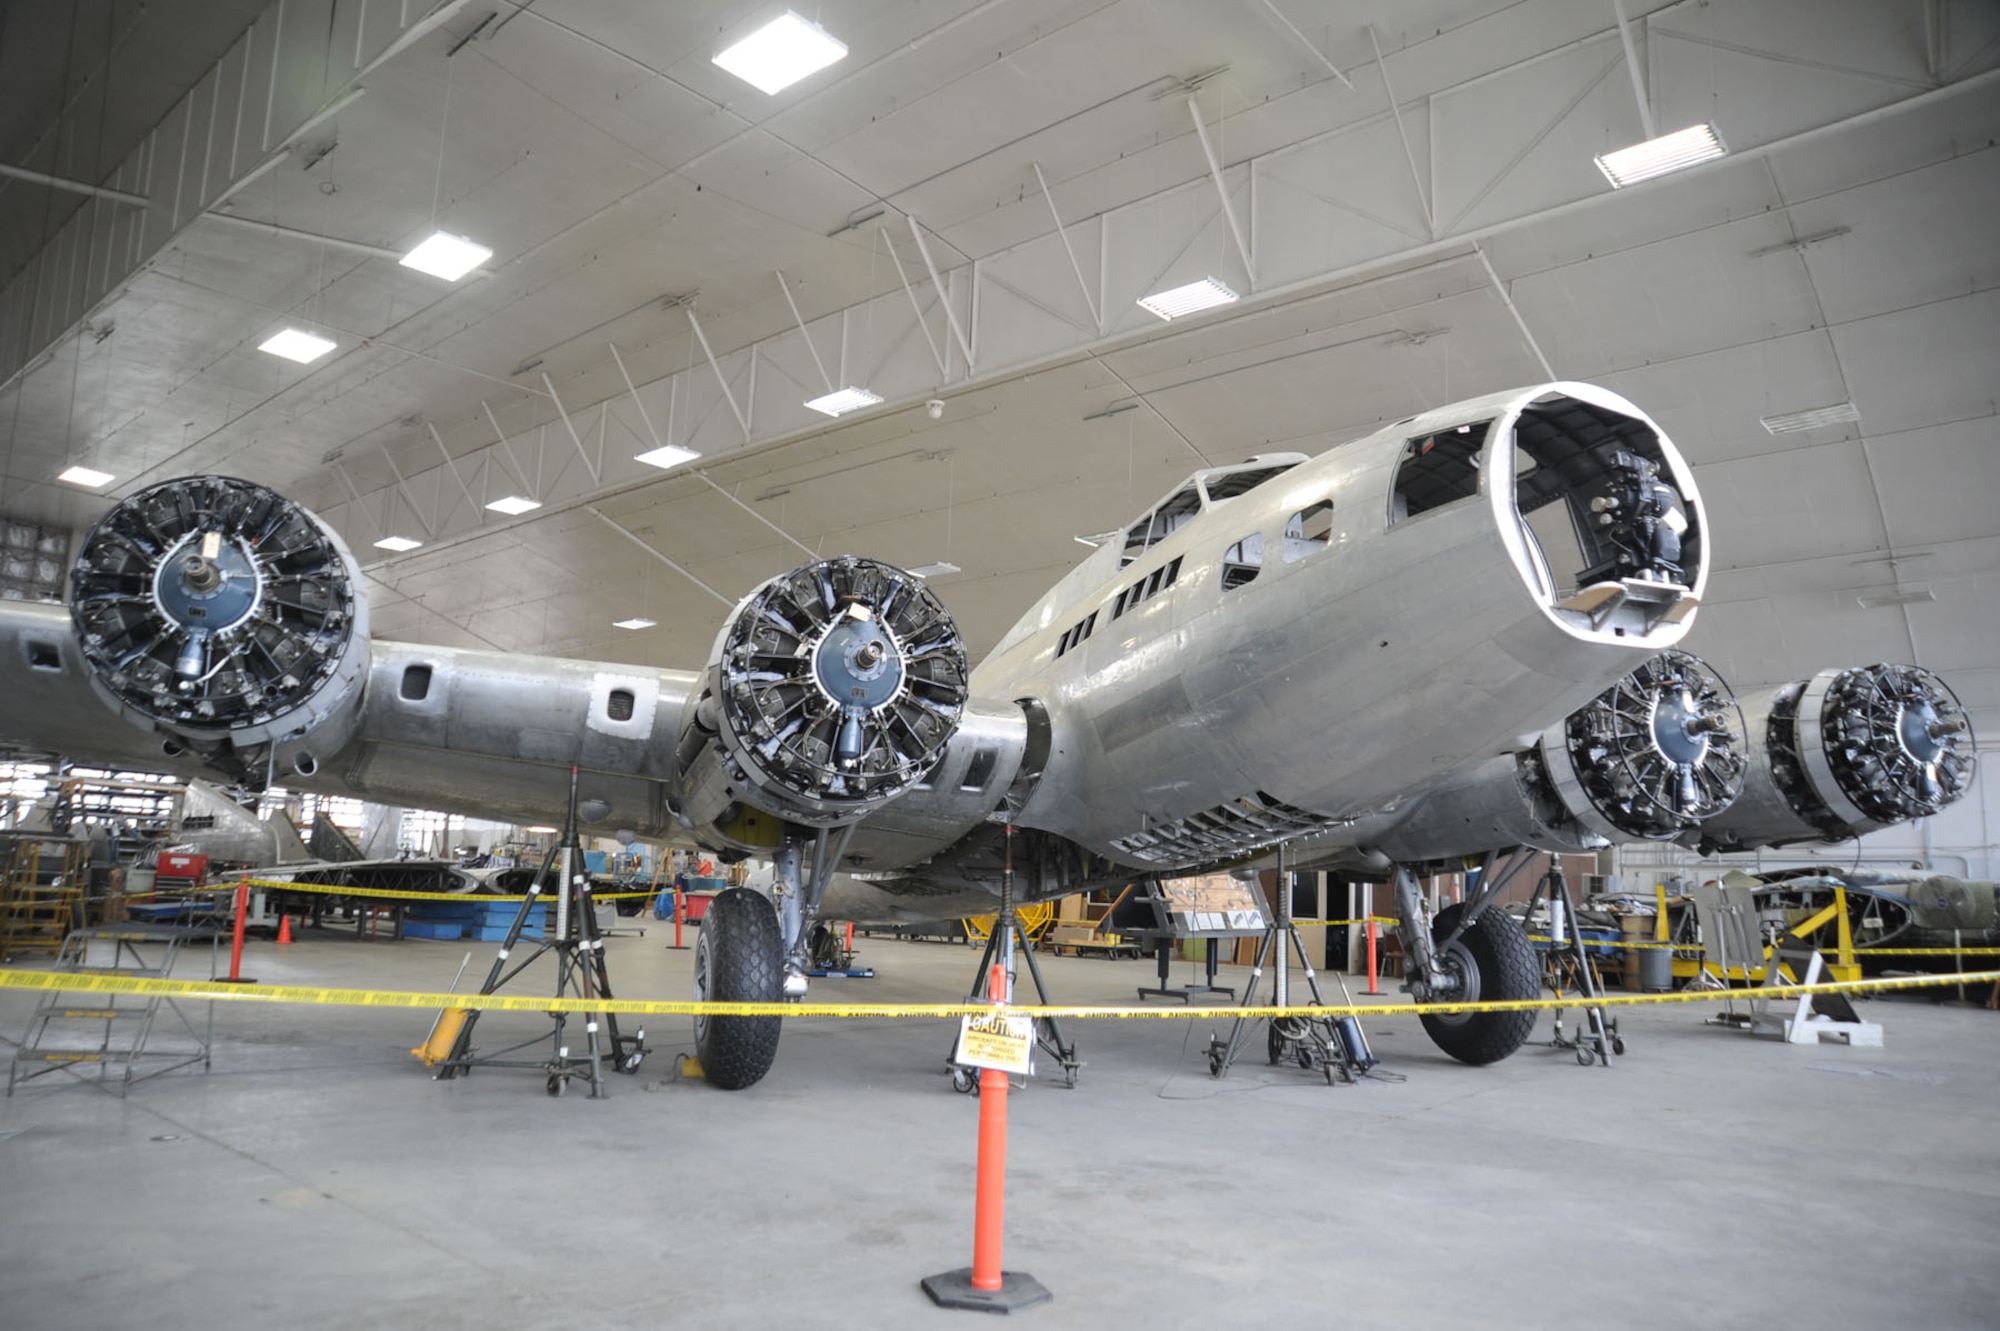 DAYTON, Ohio (12/2011) -- The B-17F "Memphis Belle" in the restoration hangar at the National Museum of the United States Air Force. (U.S. Air Force photo)